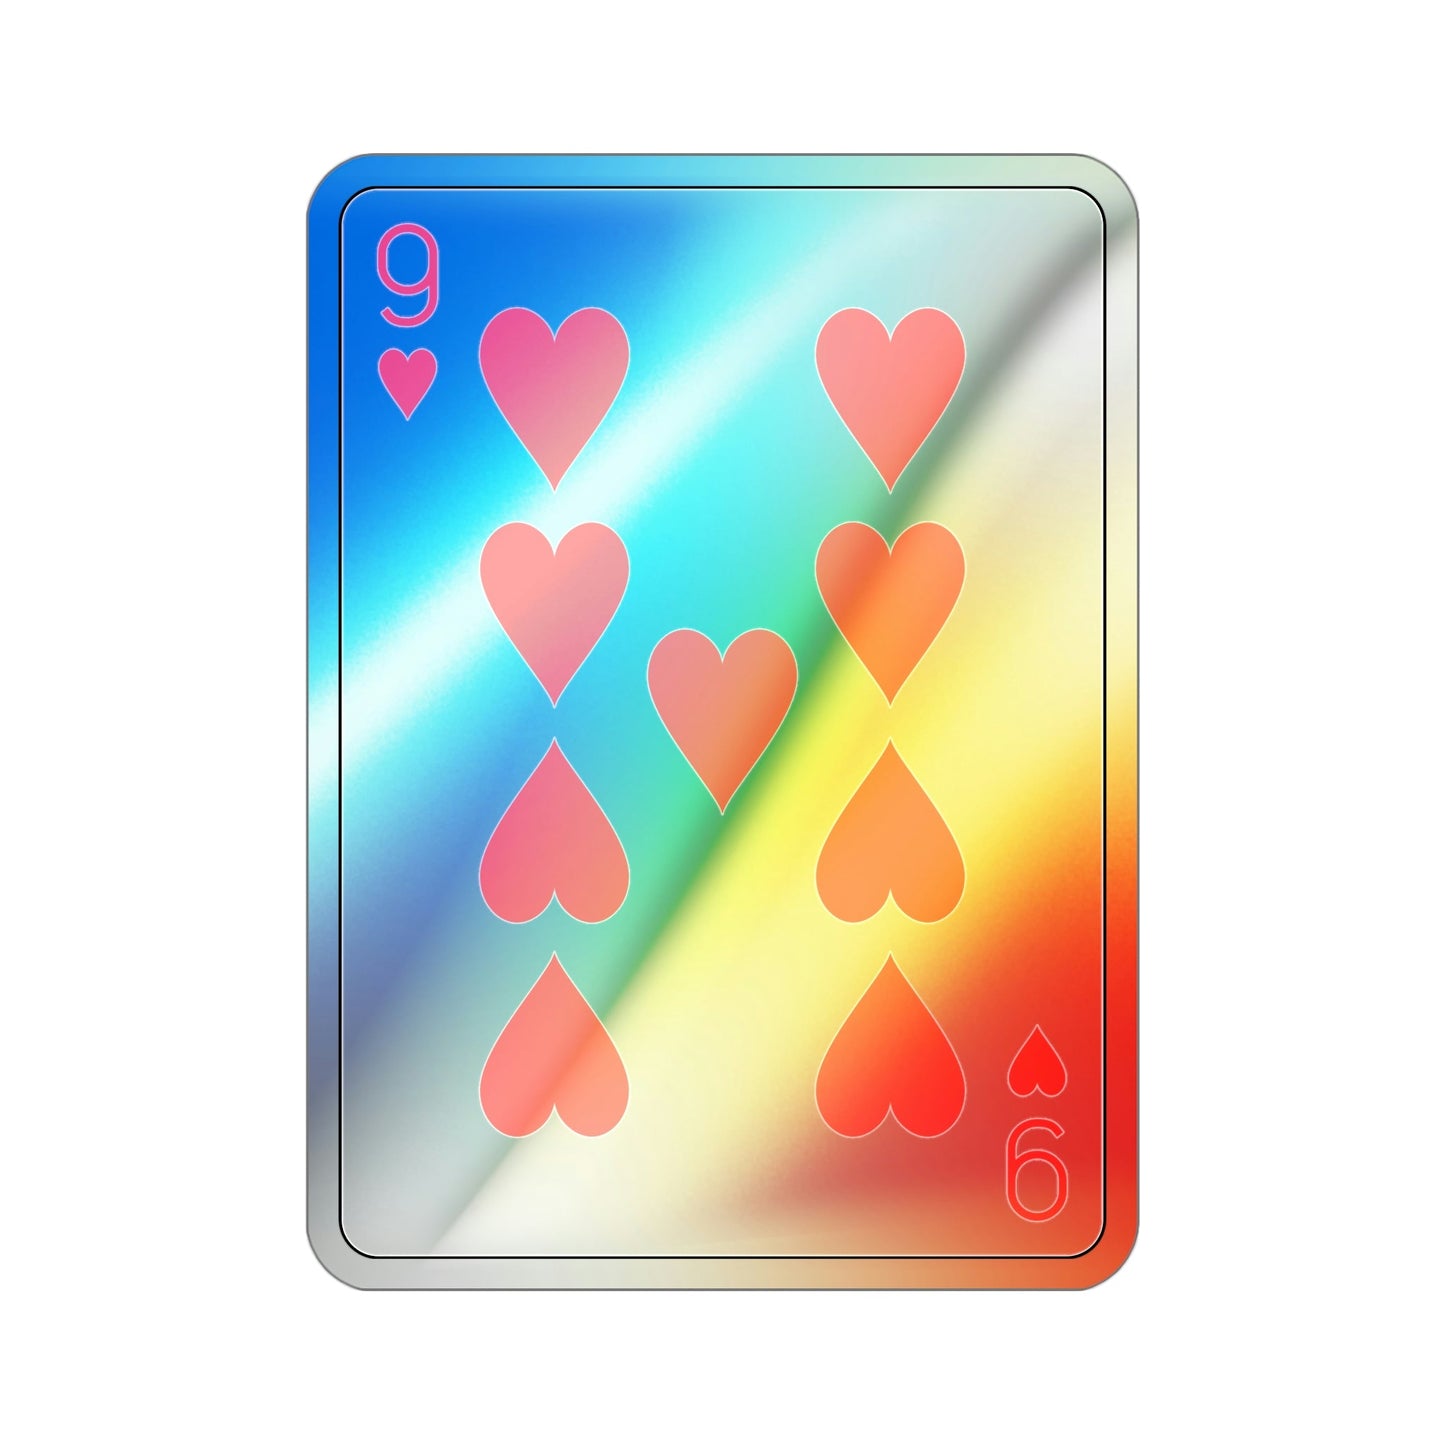 9 of Hearts Playing Card Holographic STICKER Die-Cut Vinyl Decal-4 Inch-The Sticker Space